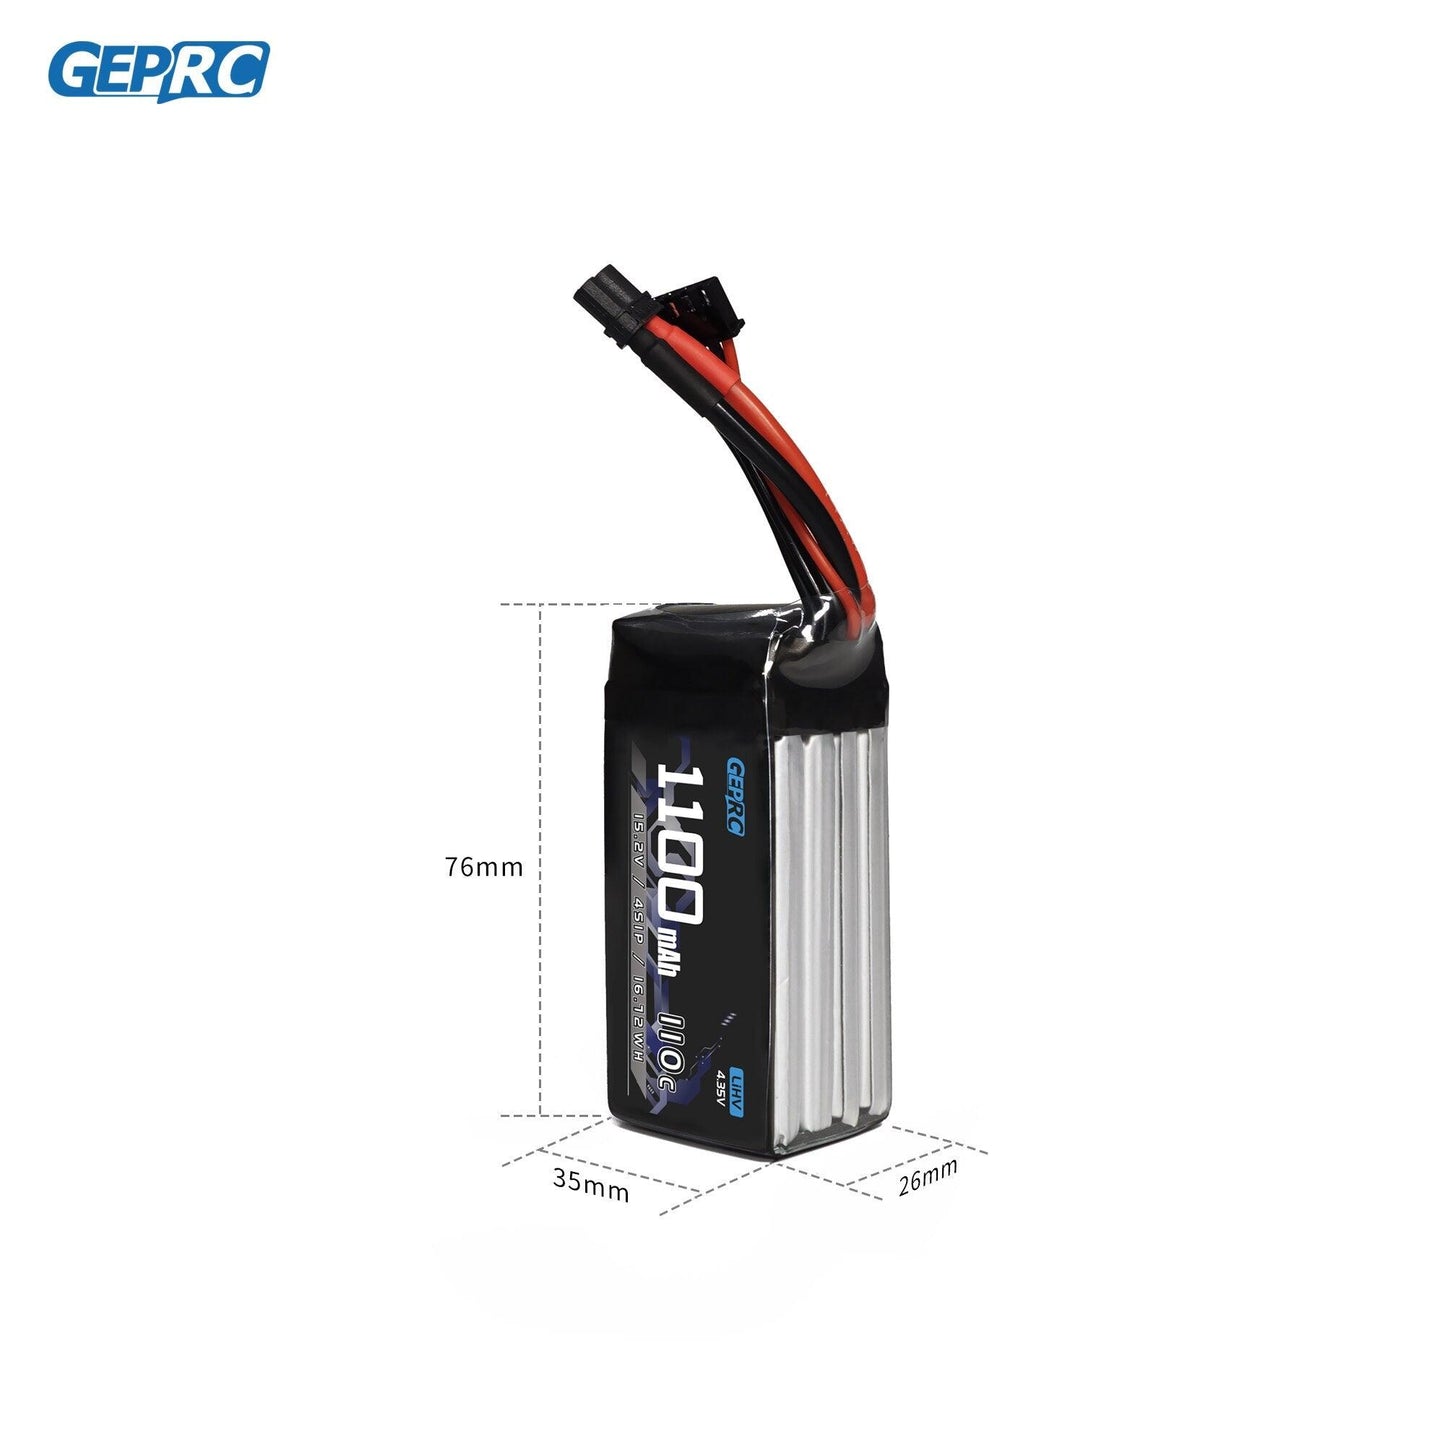 GEPRC 4S 1100mAh 110C LiPo Battery - Suitable For 3-5Inch Series Drone For RC FPV Quadcopter Freestyle Drone Accessories Parts FPV Battery - RCDrone